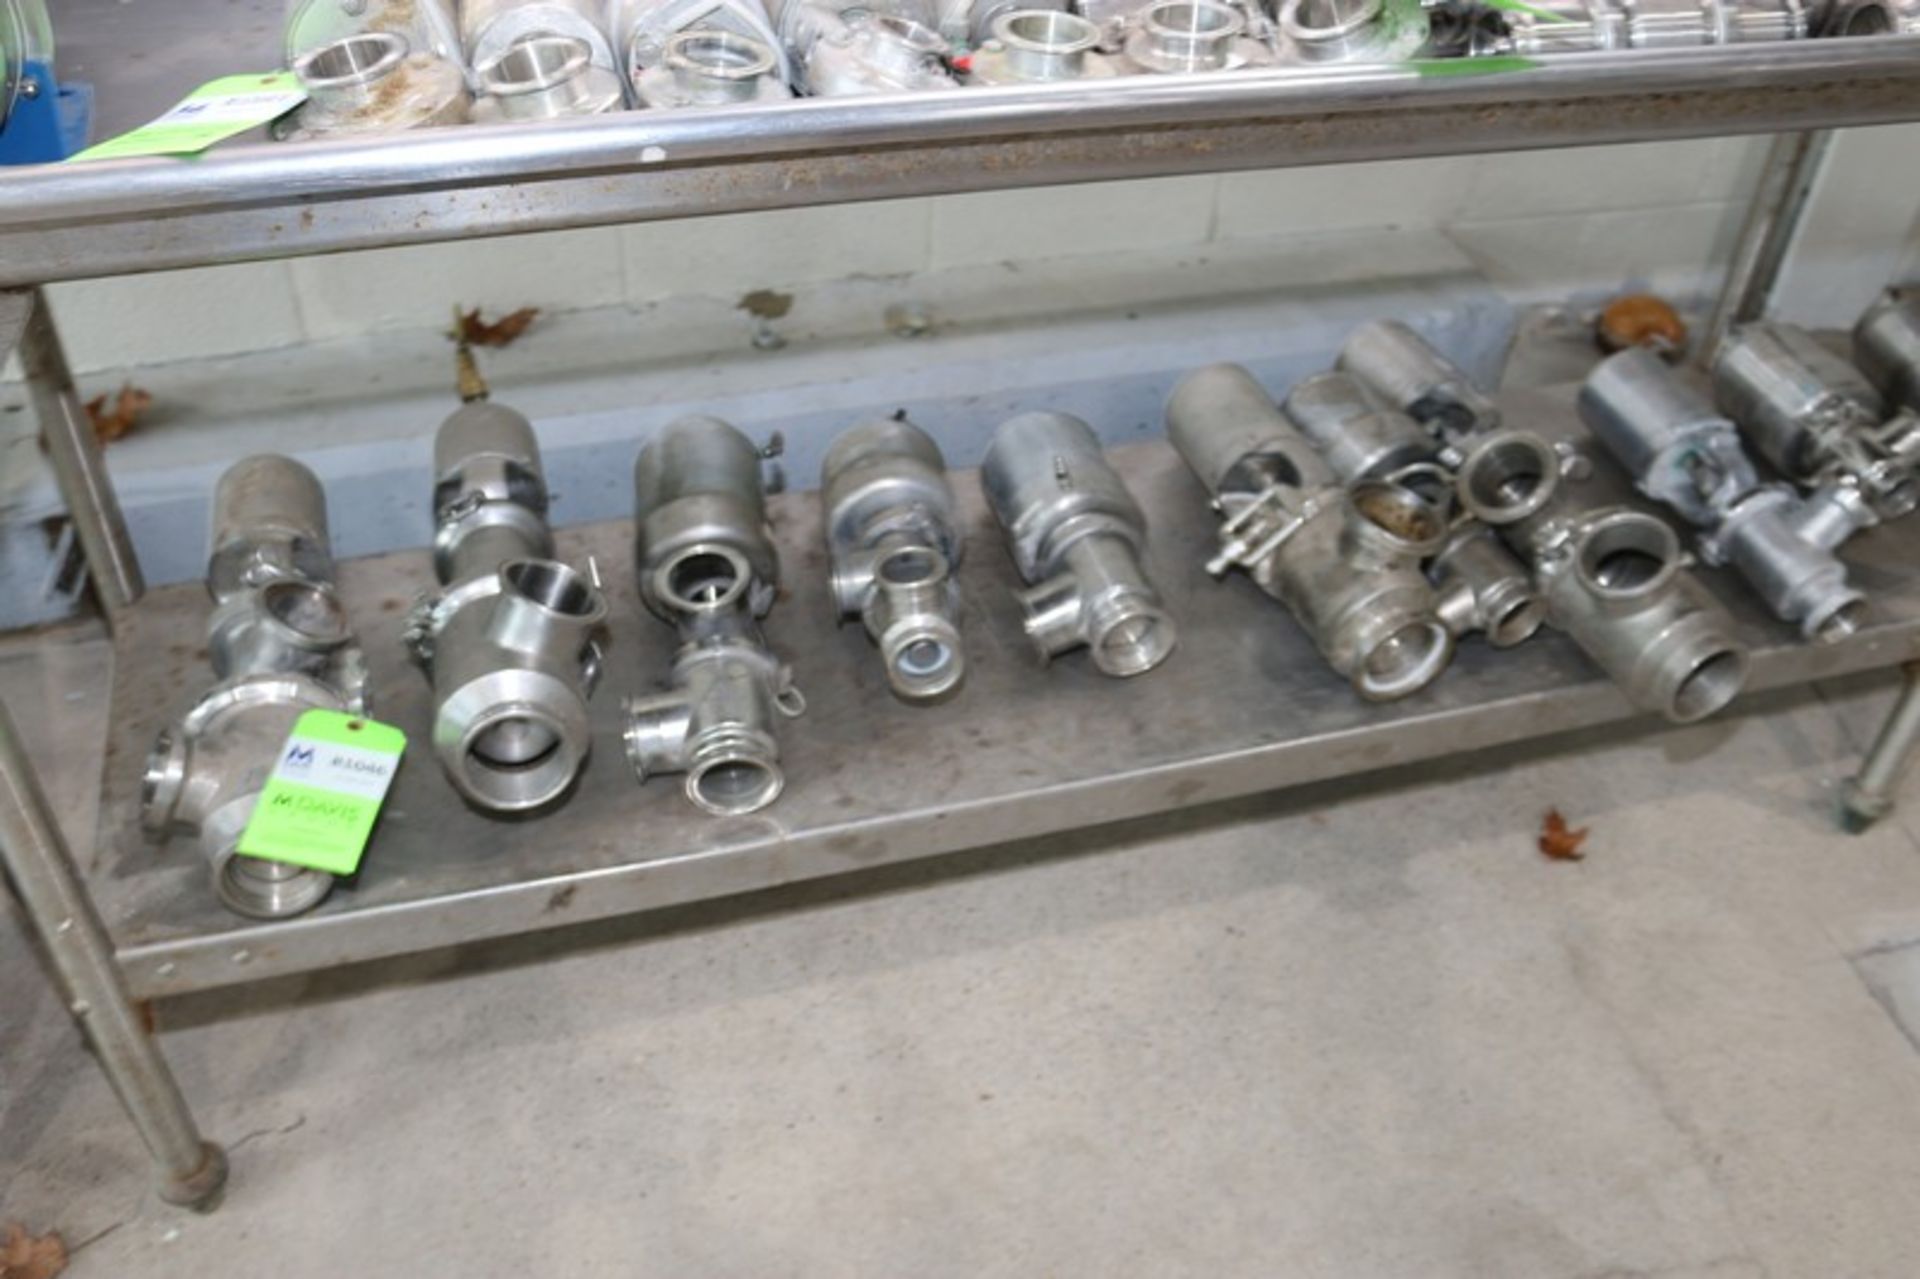 (16) S/S Air Valves, Some 2-Way Type & 3-Way Type, Assorted Sizes (INV#81046)(Located @ the MDG